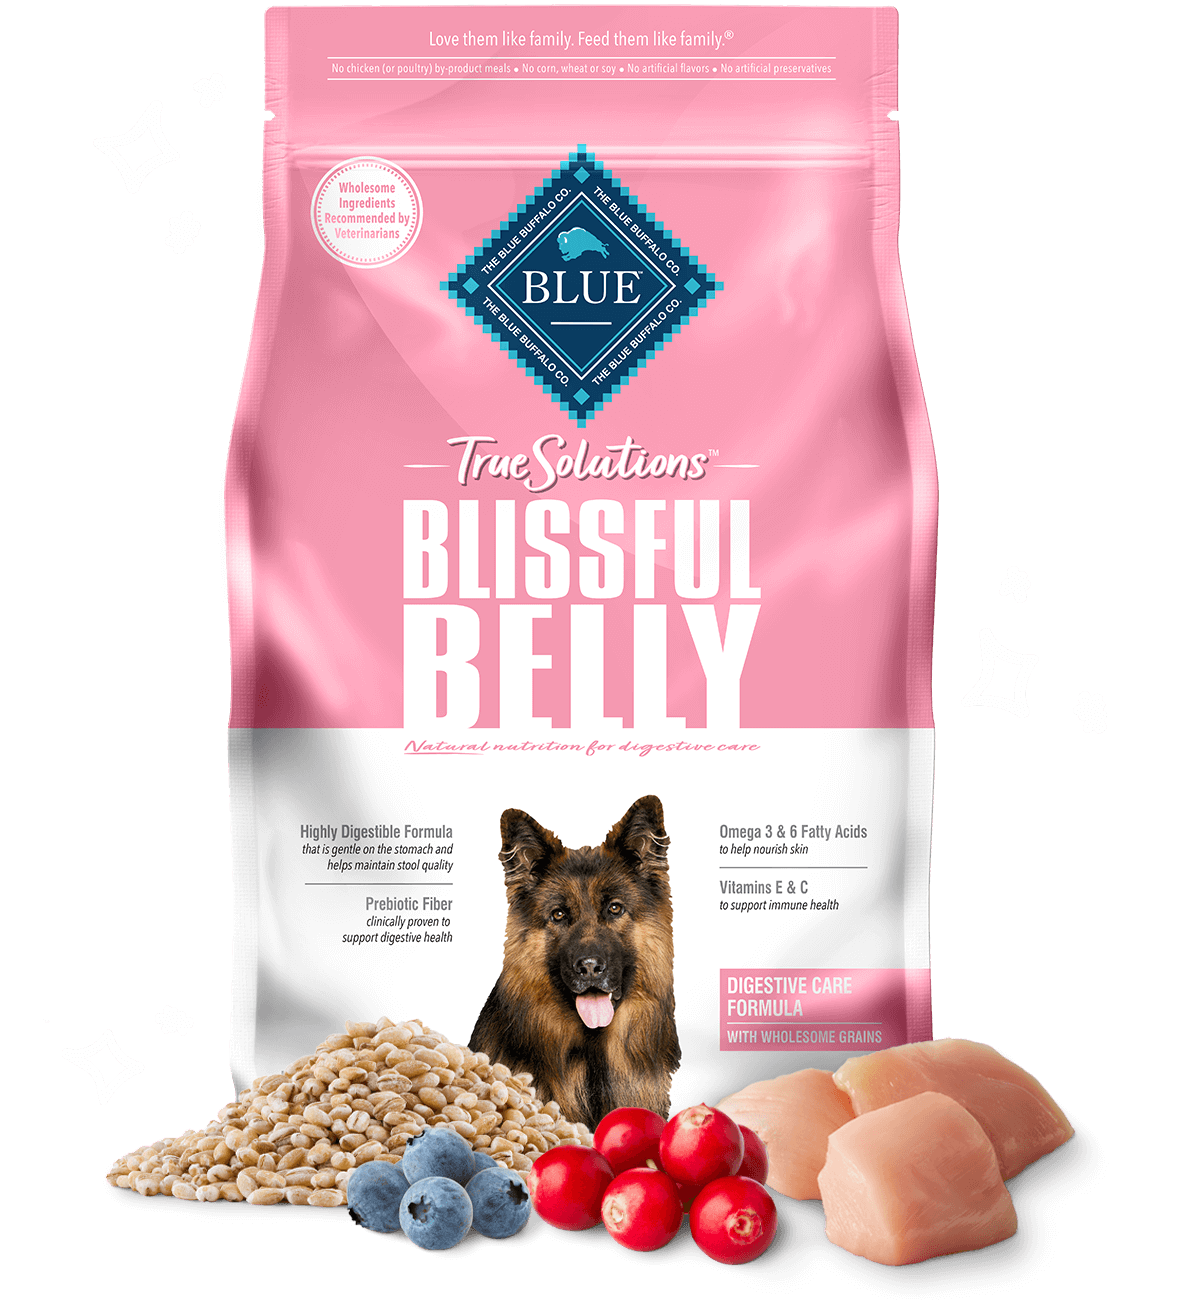 blue true solutions blissful belly digestive care dog dry food